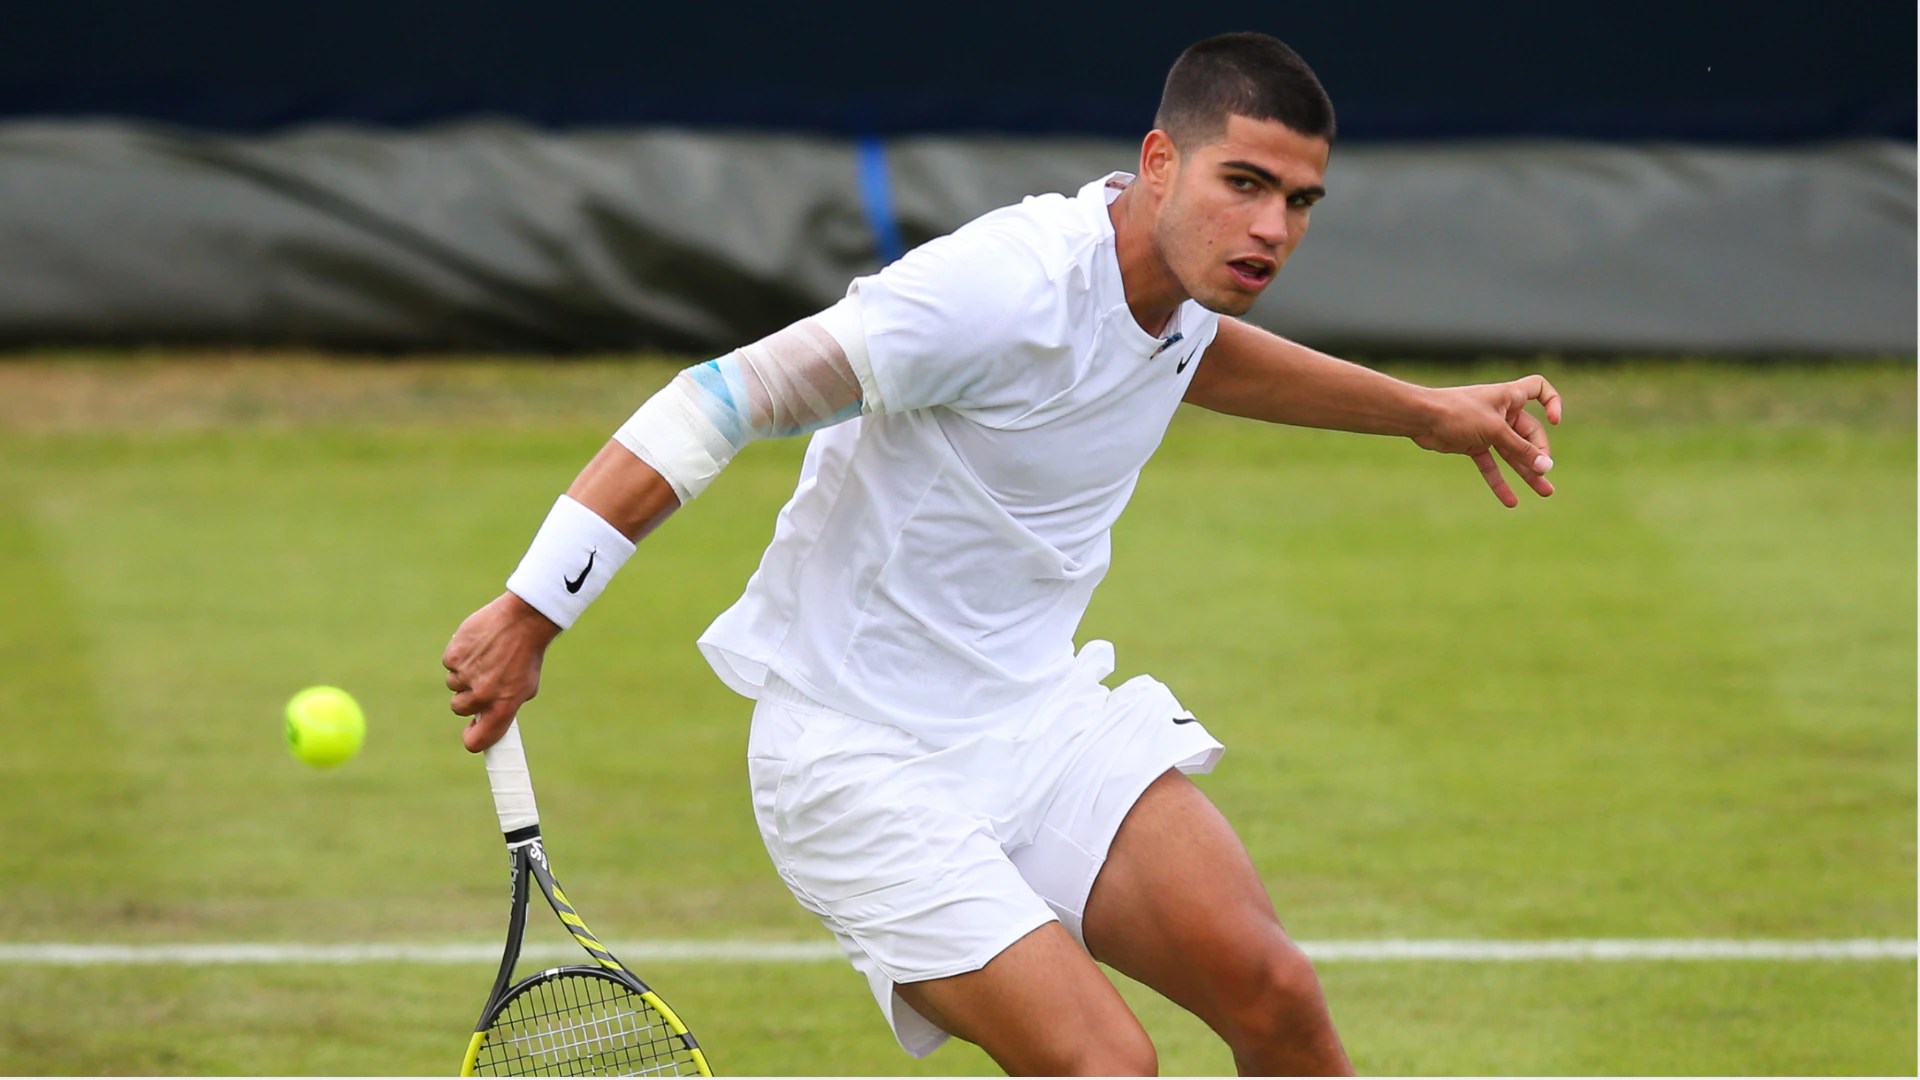 Wimbledon 2022 LIVE: From Carlos Alcaraz to Emma Raducanu - Top 5 teenagers to watch out for in Wimbledon 2022 - Check Out